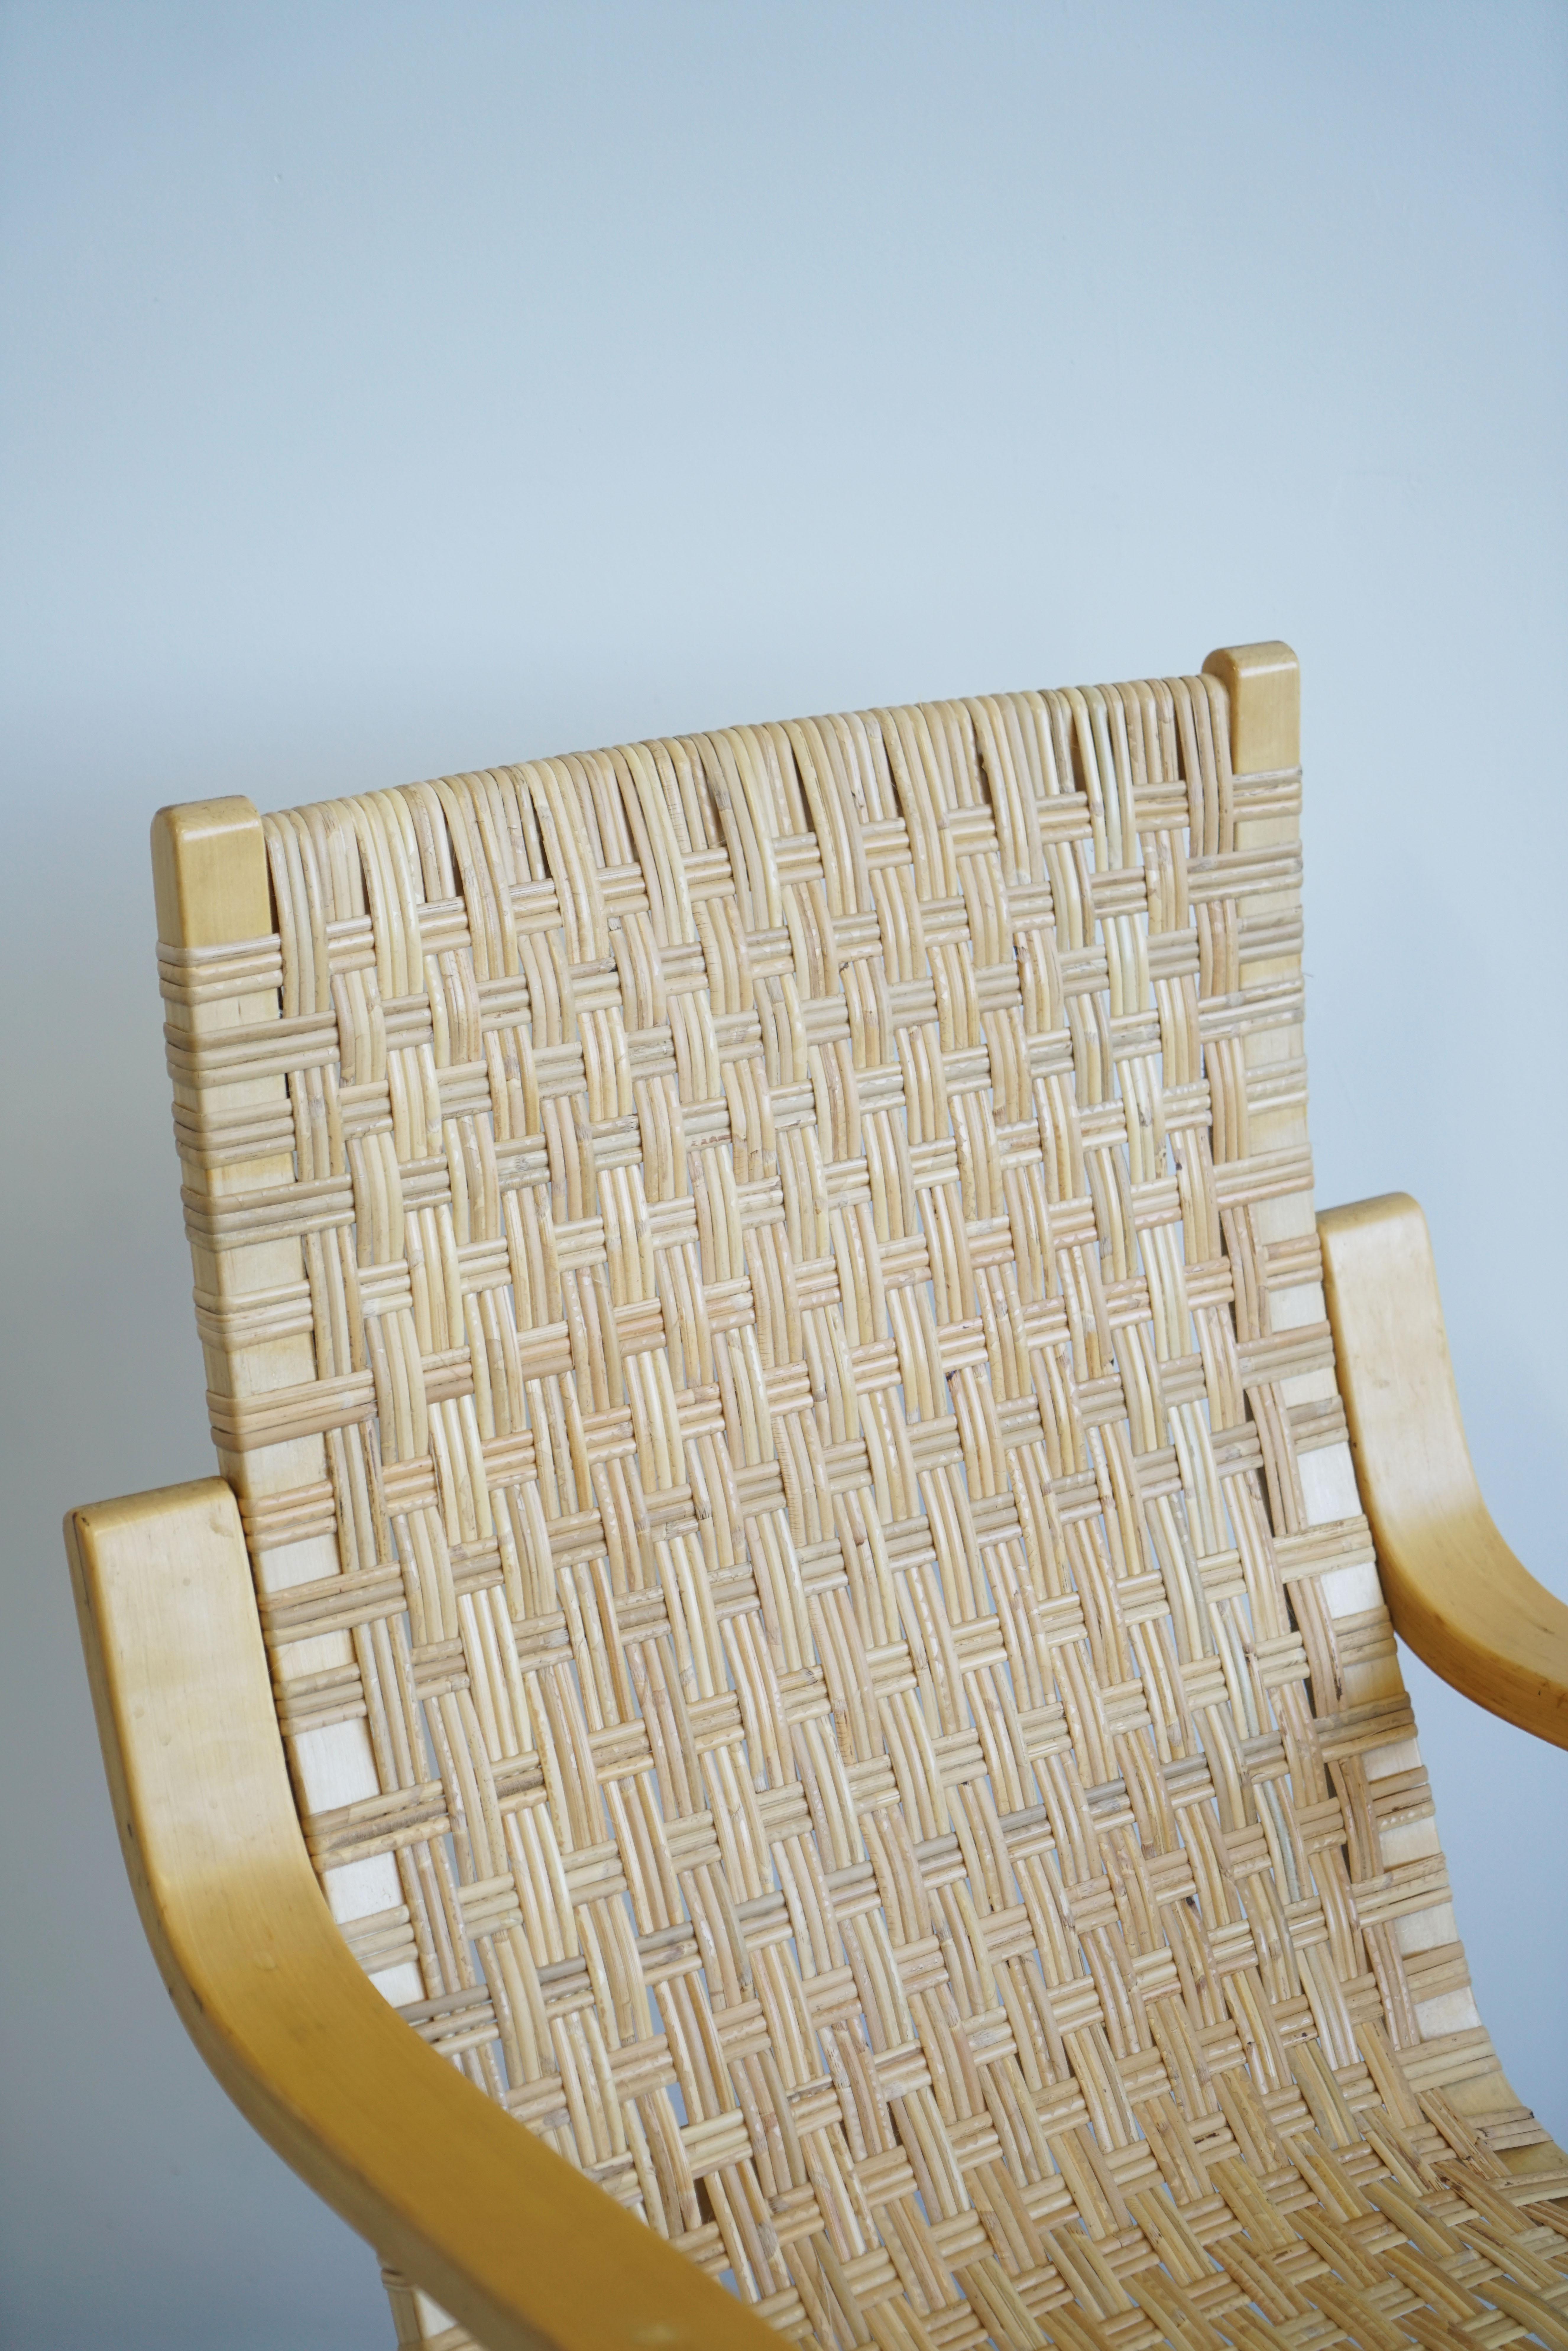 Caning 1960 Alvar Aalto Cantilever Chair Model 406 by Artek in Birch and Cane Webbing For Sale